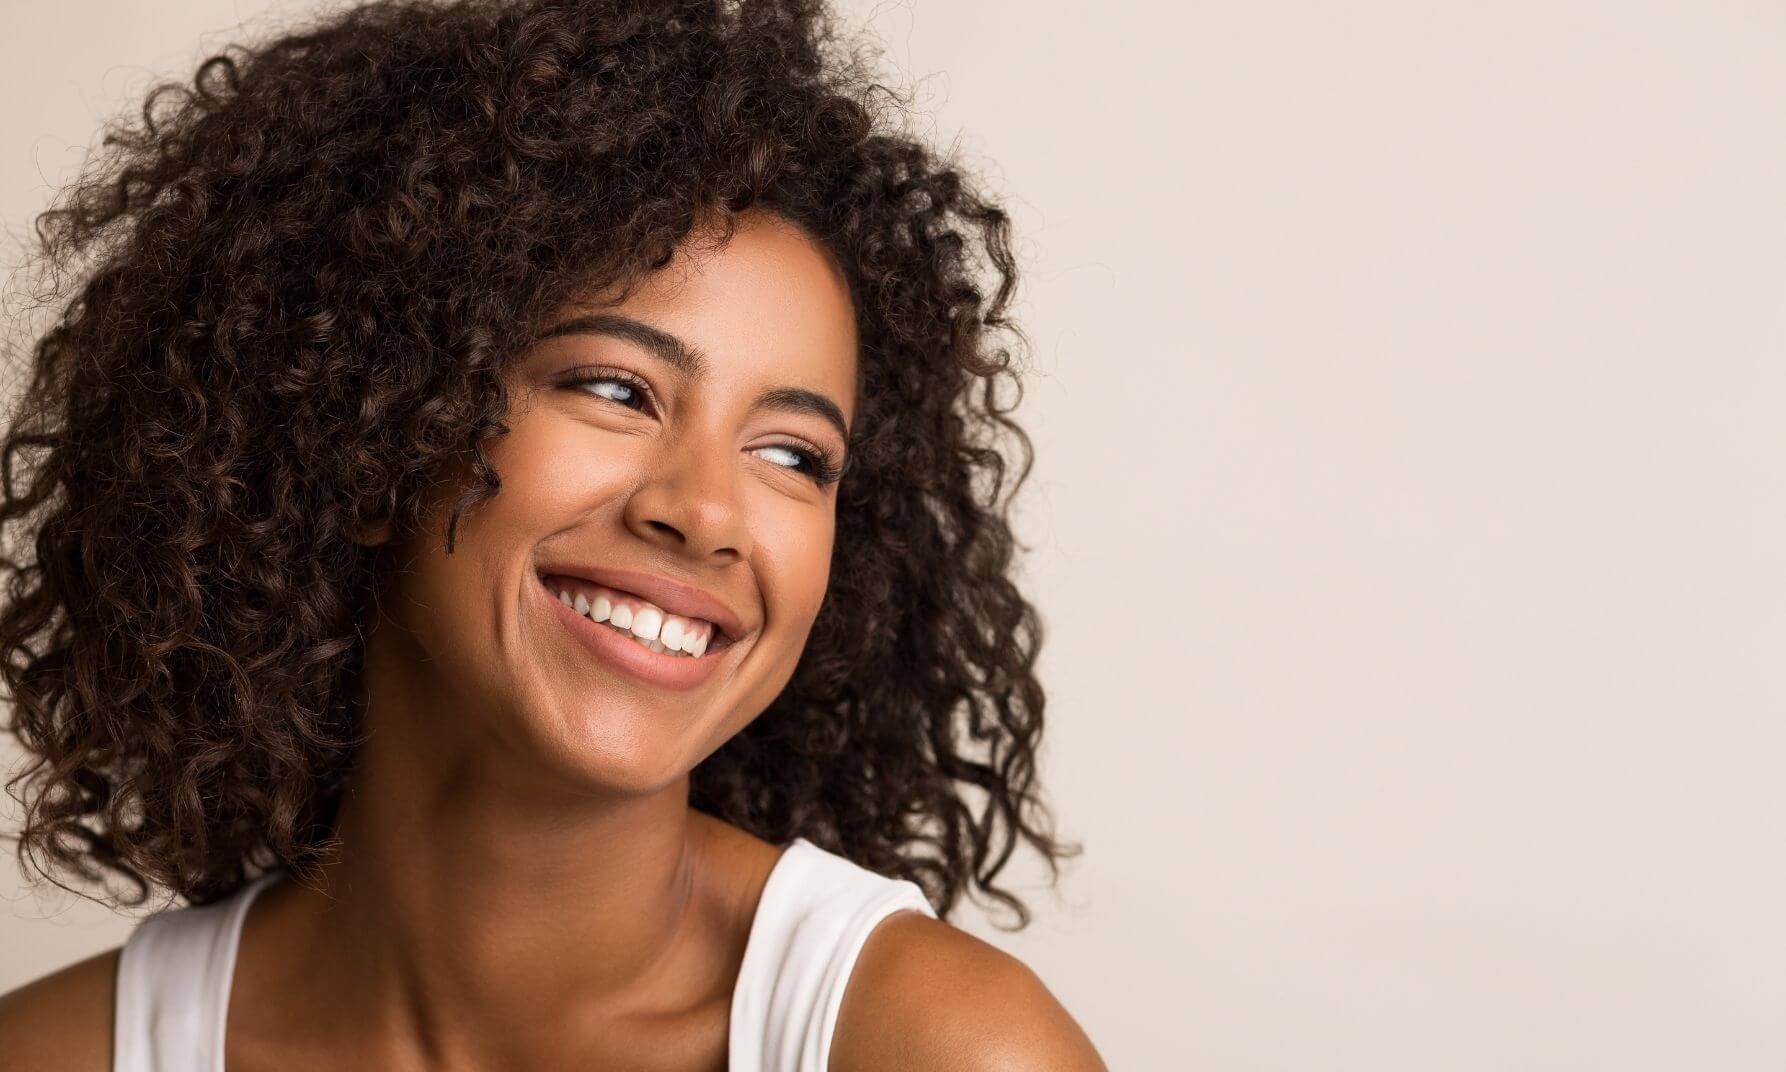 What Are The Benefits Of A Smile Makeover? | Skin Clinic York